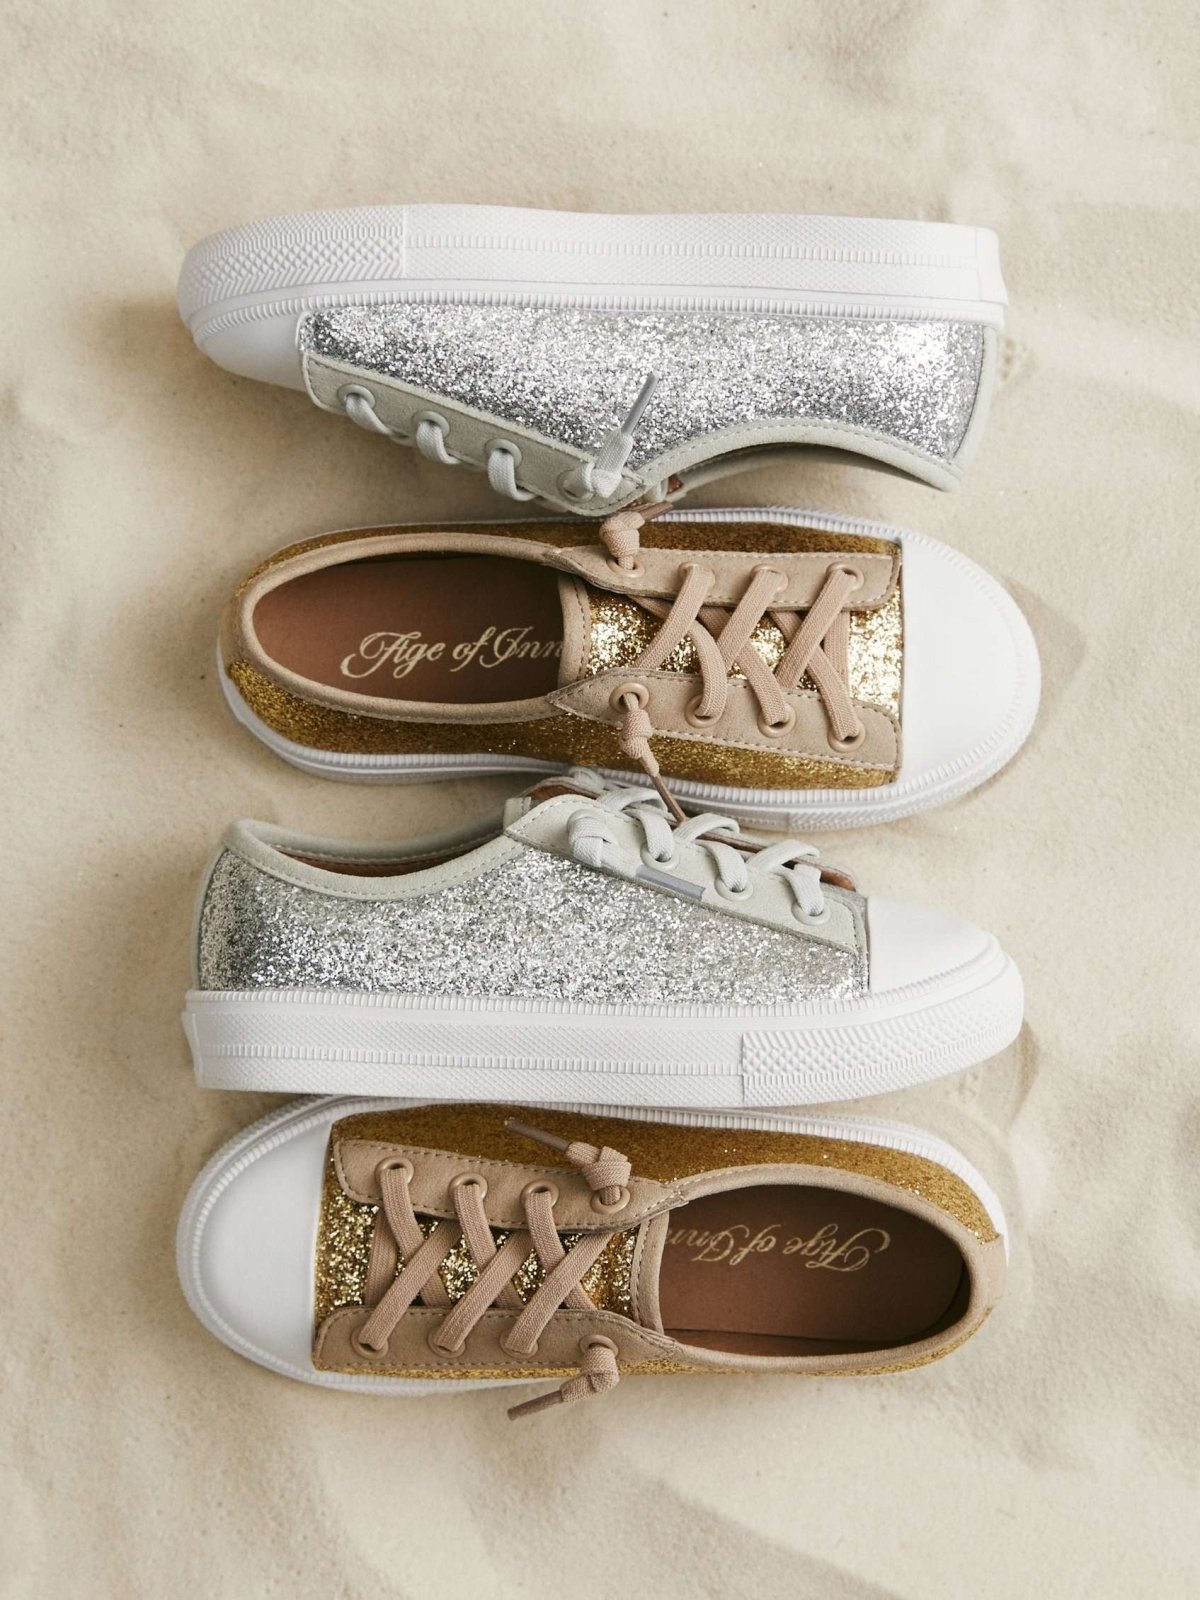 Mabel Silver Sneakers by Age of Innocence